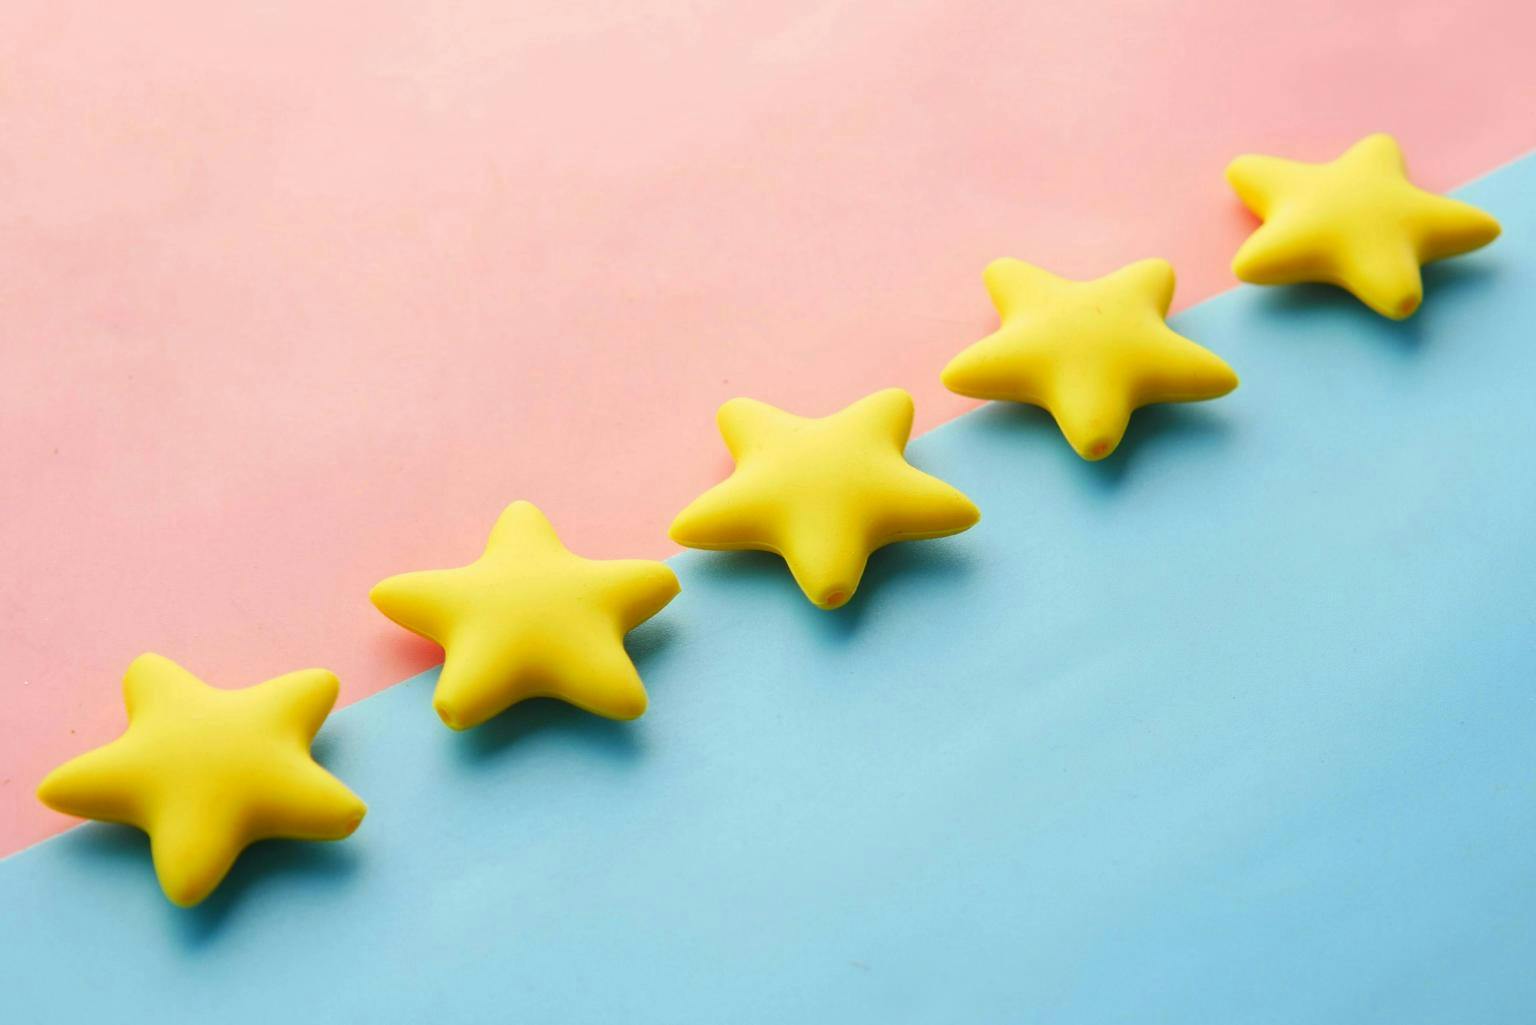 A row of gold stars on a pink and blue background